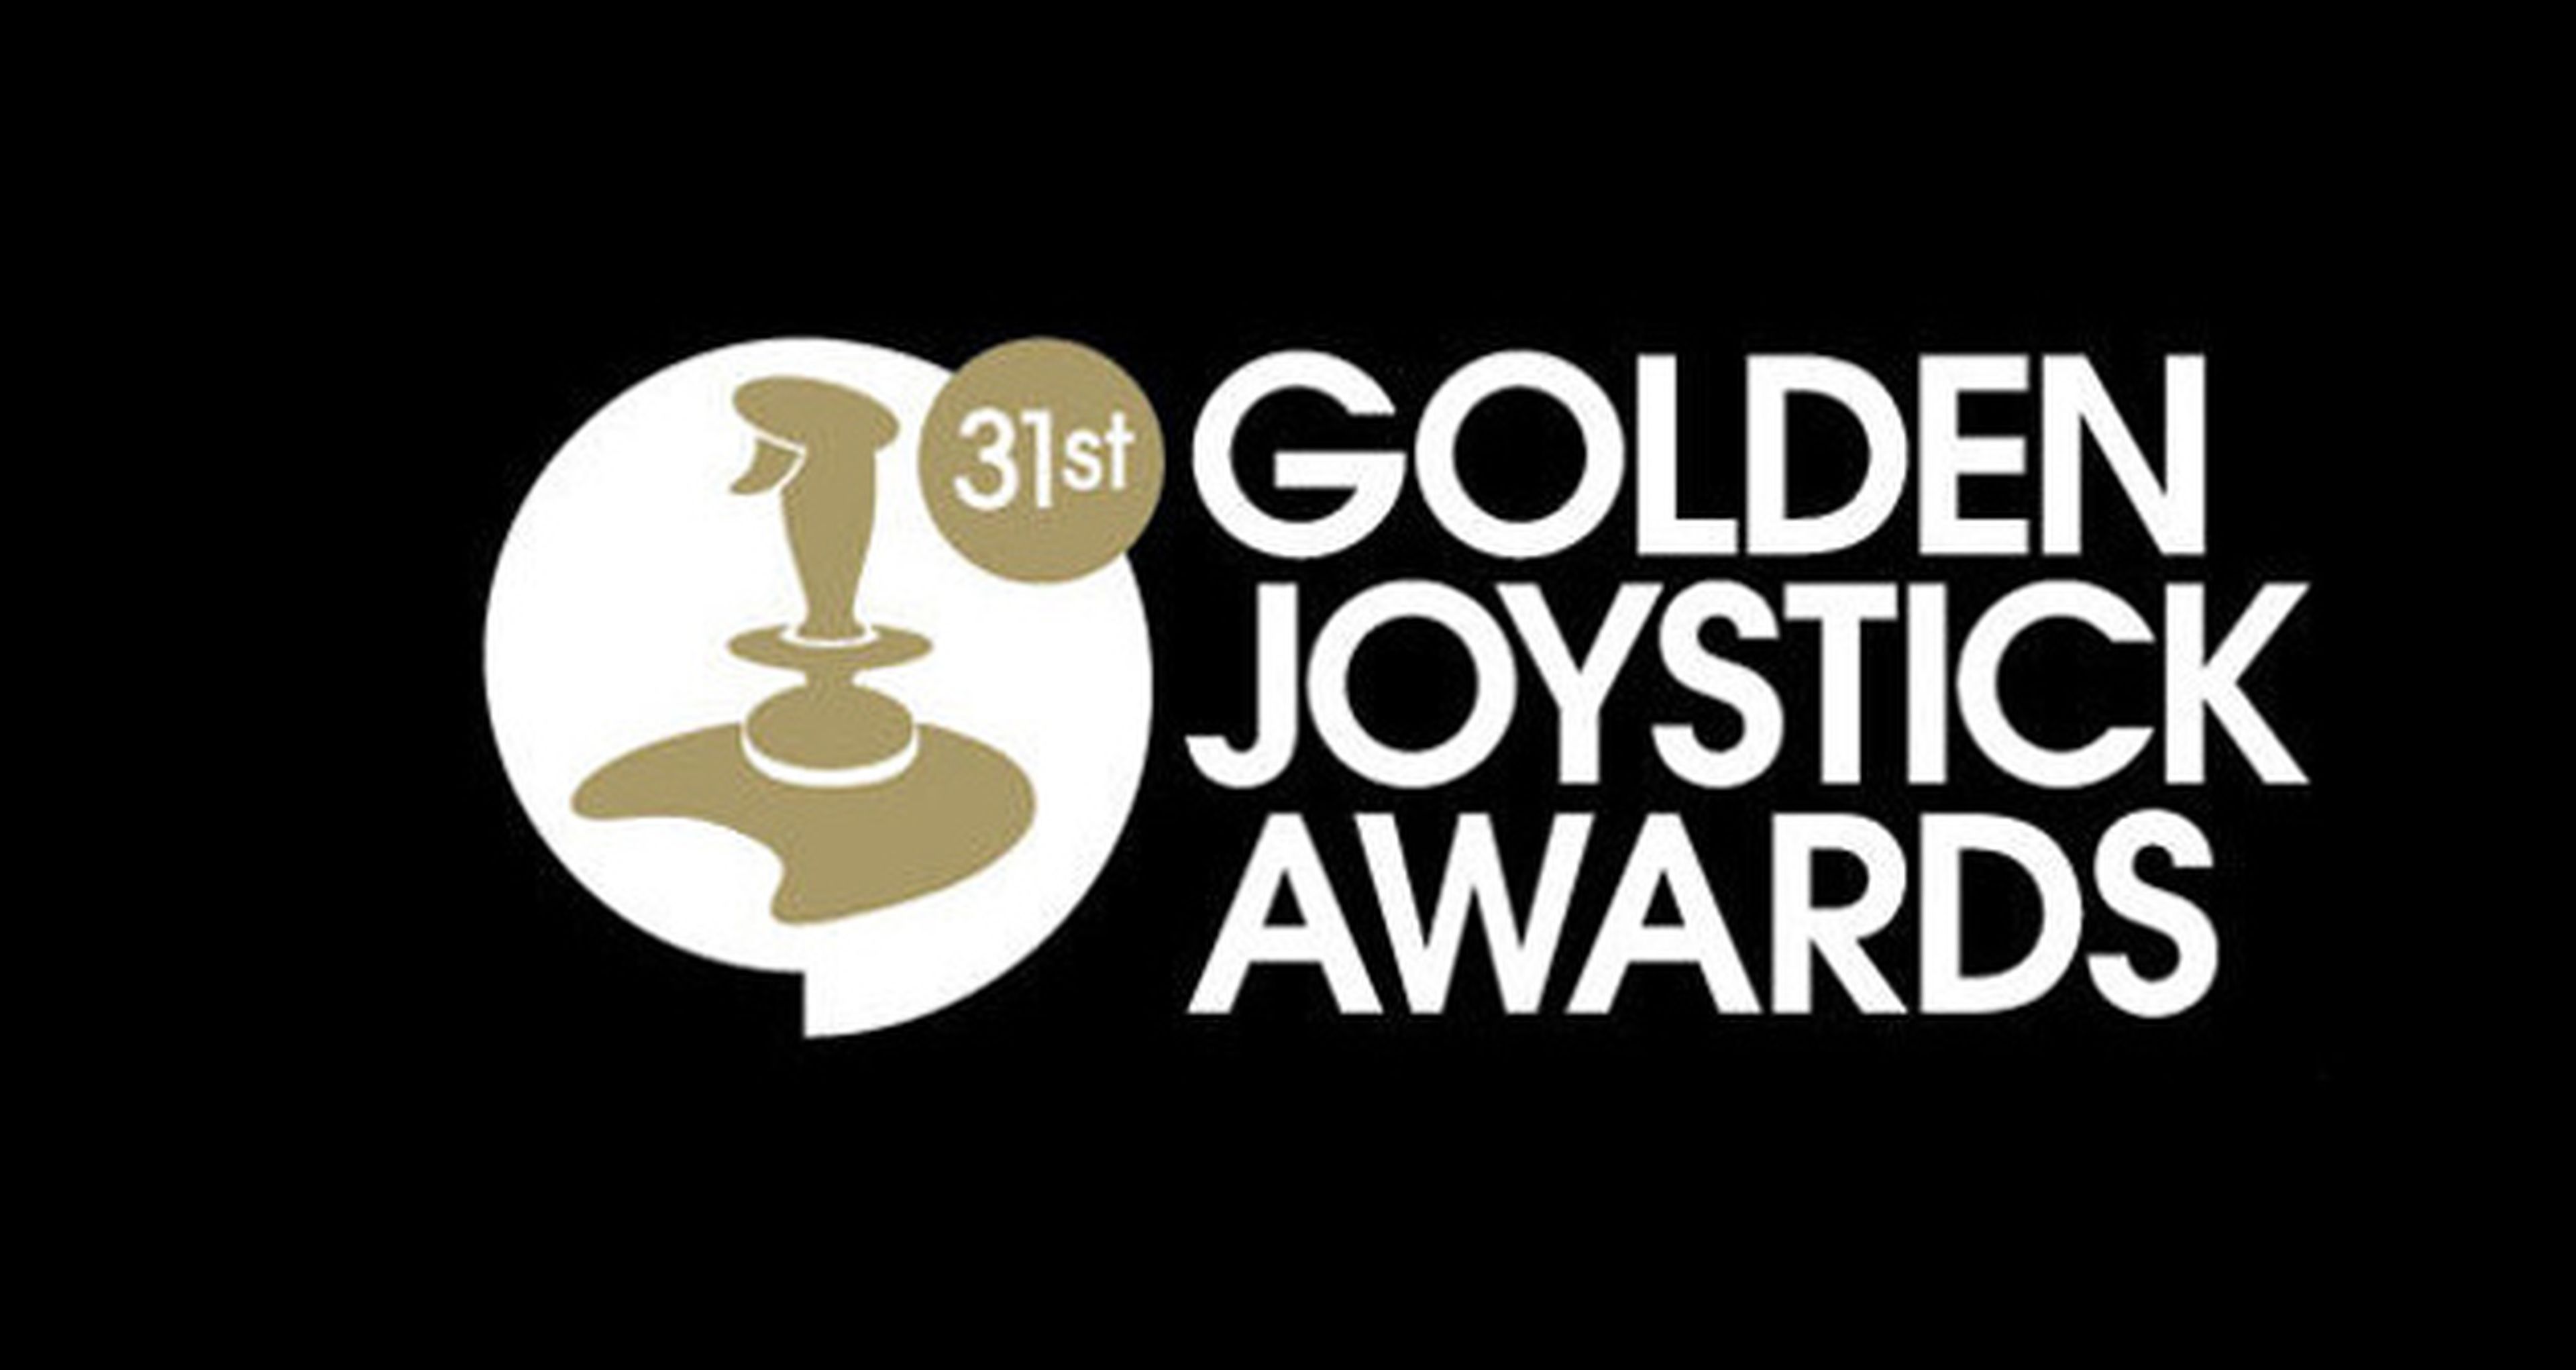 Gears 5 claims Xbox Game of the Year at the Golden Joystick Awards 2019